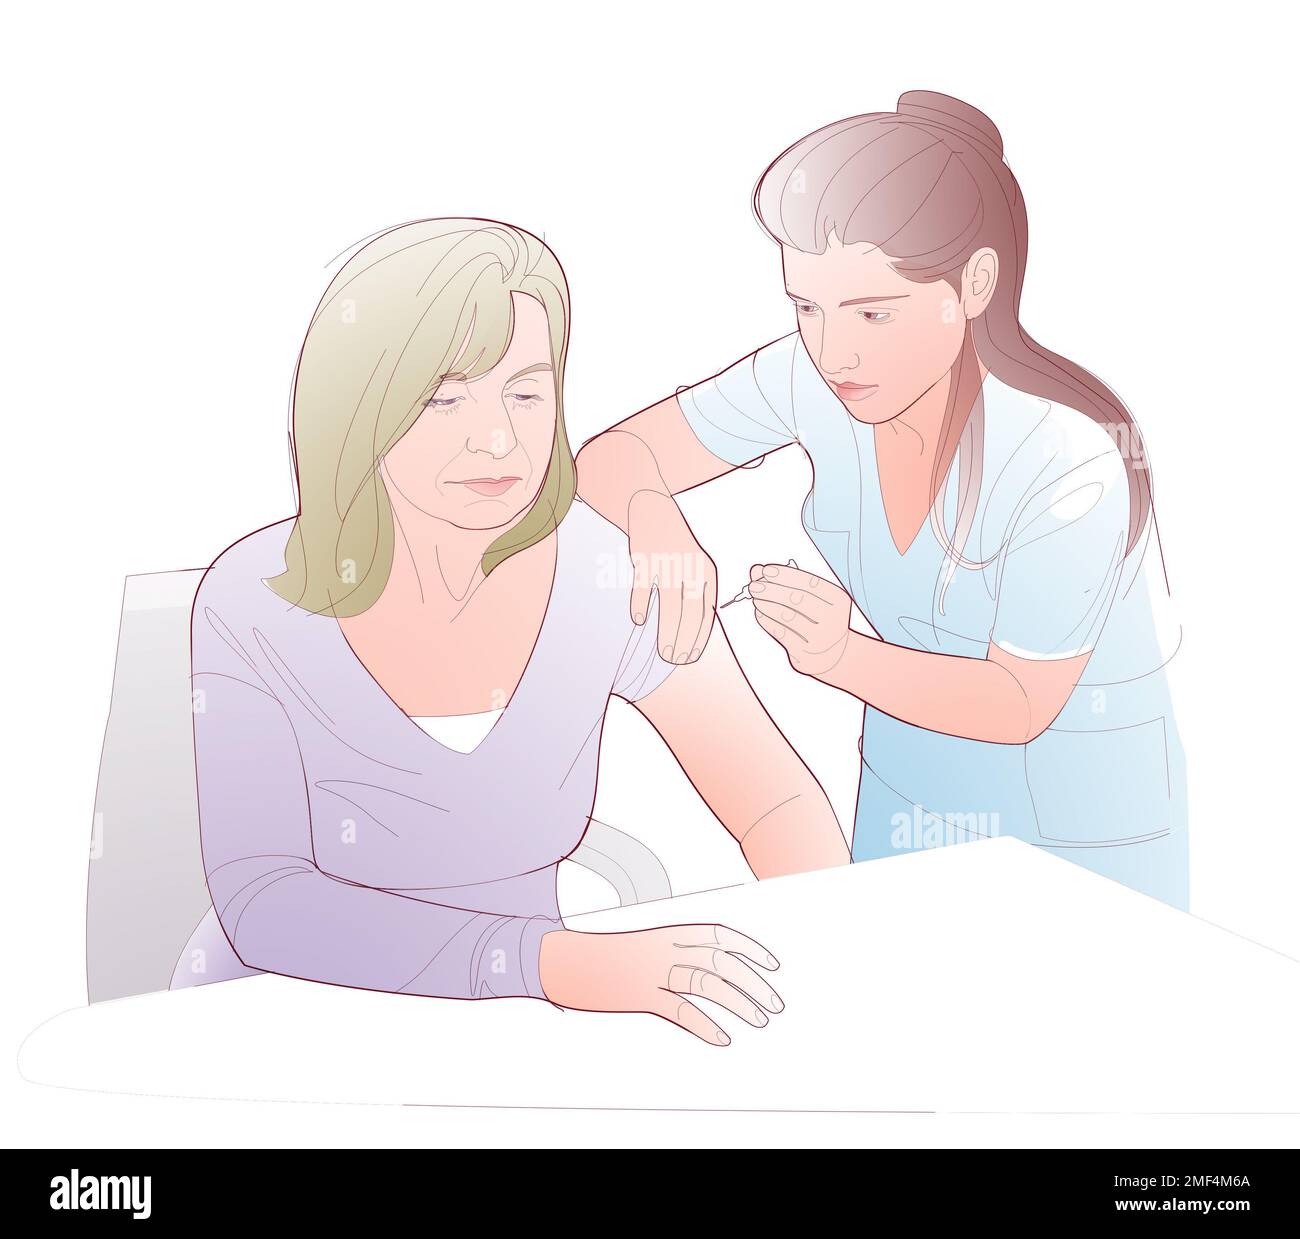 Digital illustration of a nurse vaccinating a woman. He puts it on his arm in the doctor's office. Stock Photo